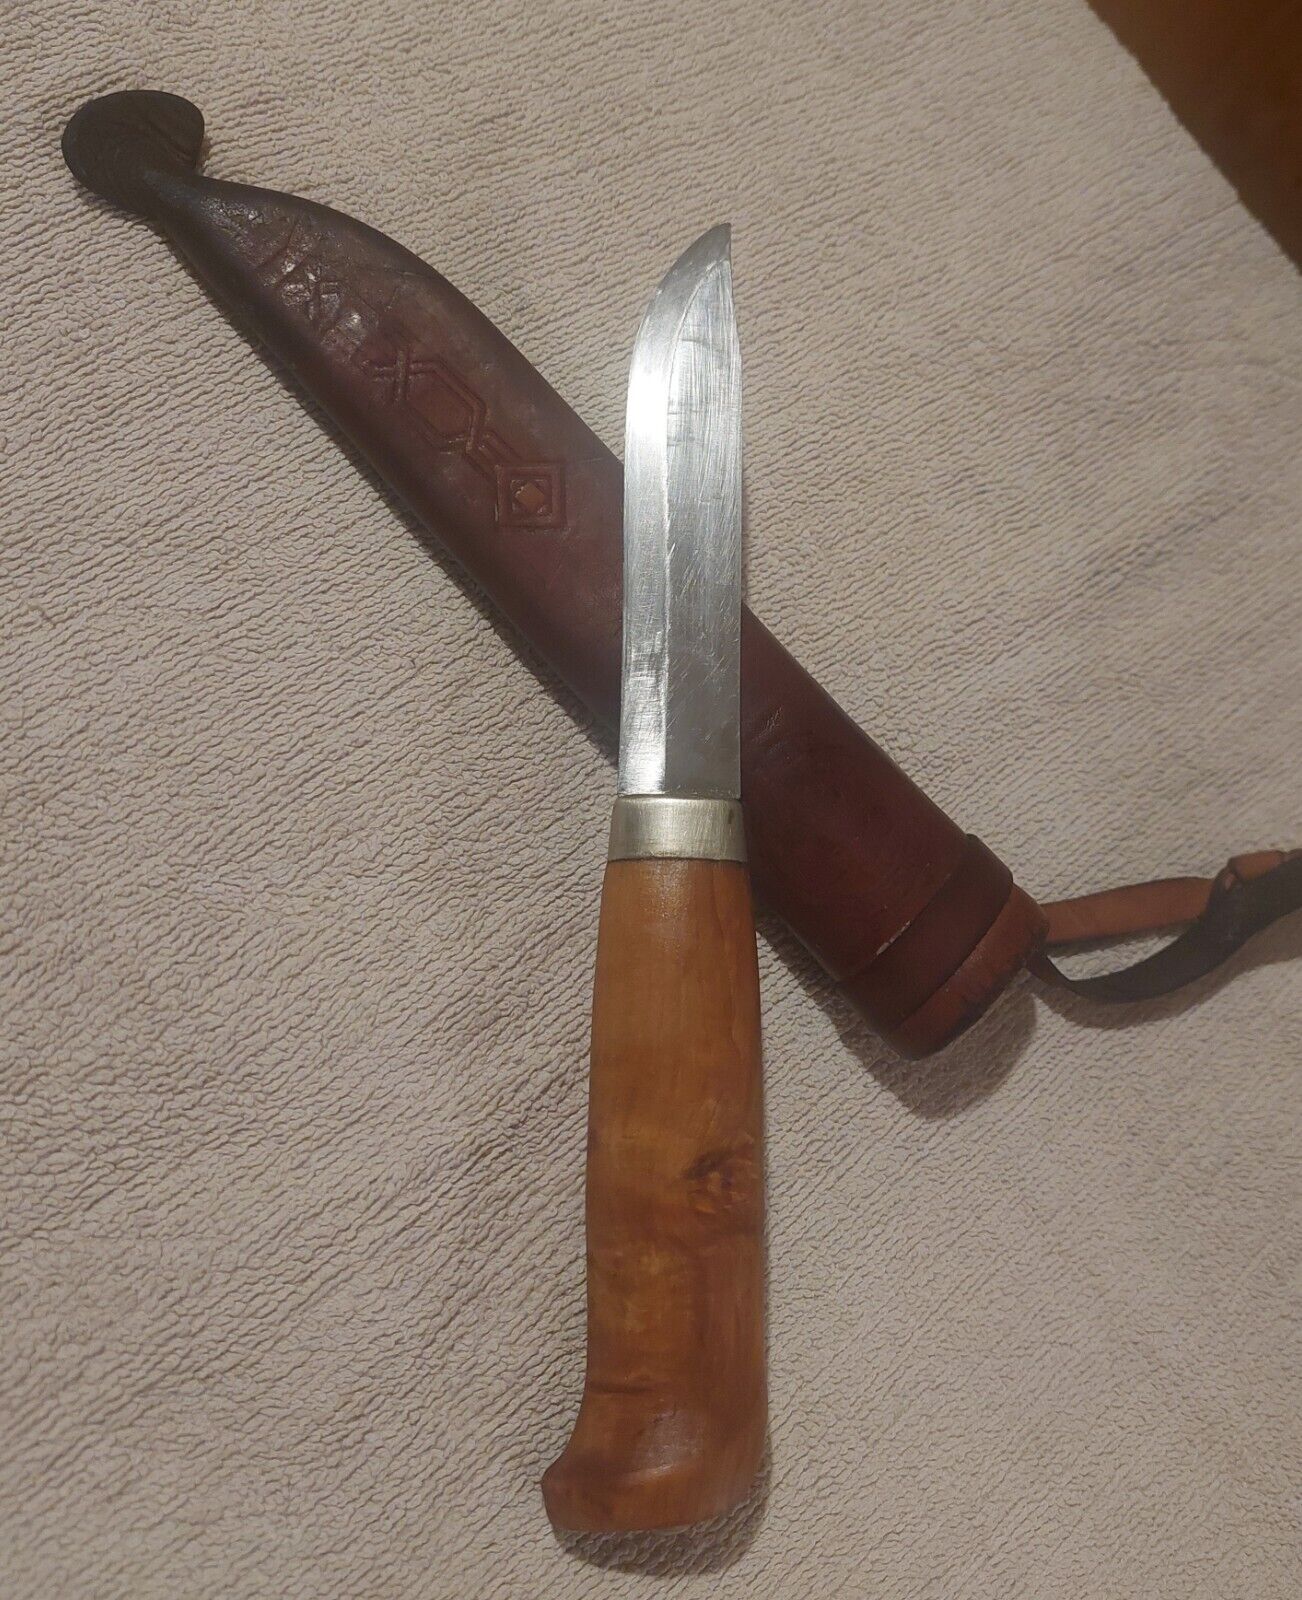 Vintage knife from Finland-Leather sheats- Wooden Handle - Stainless steel blade